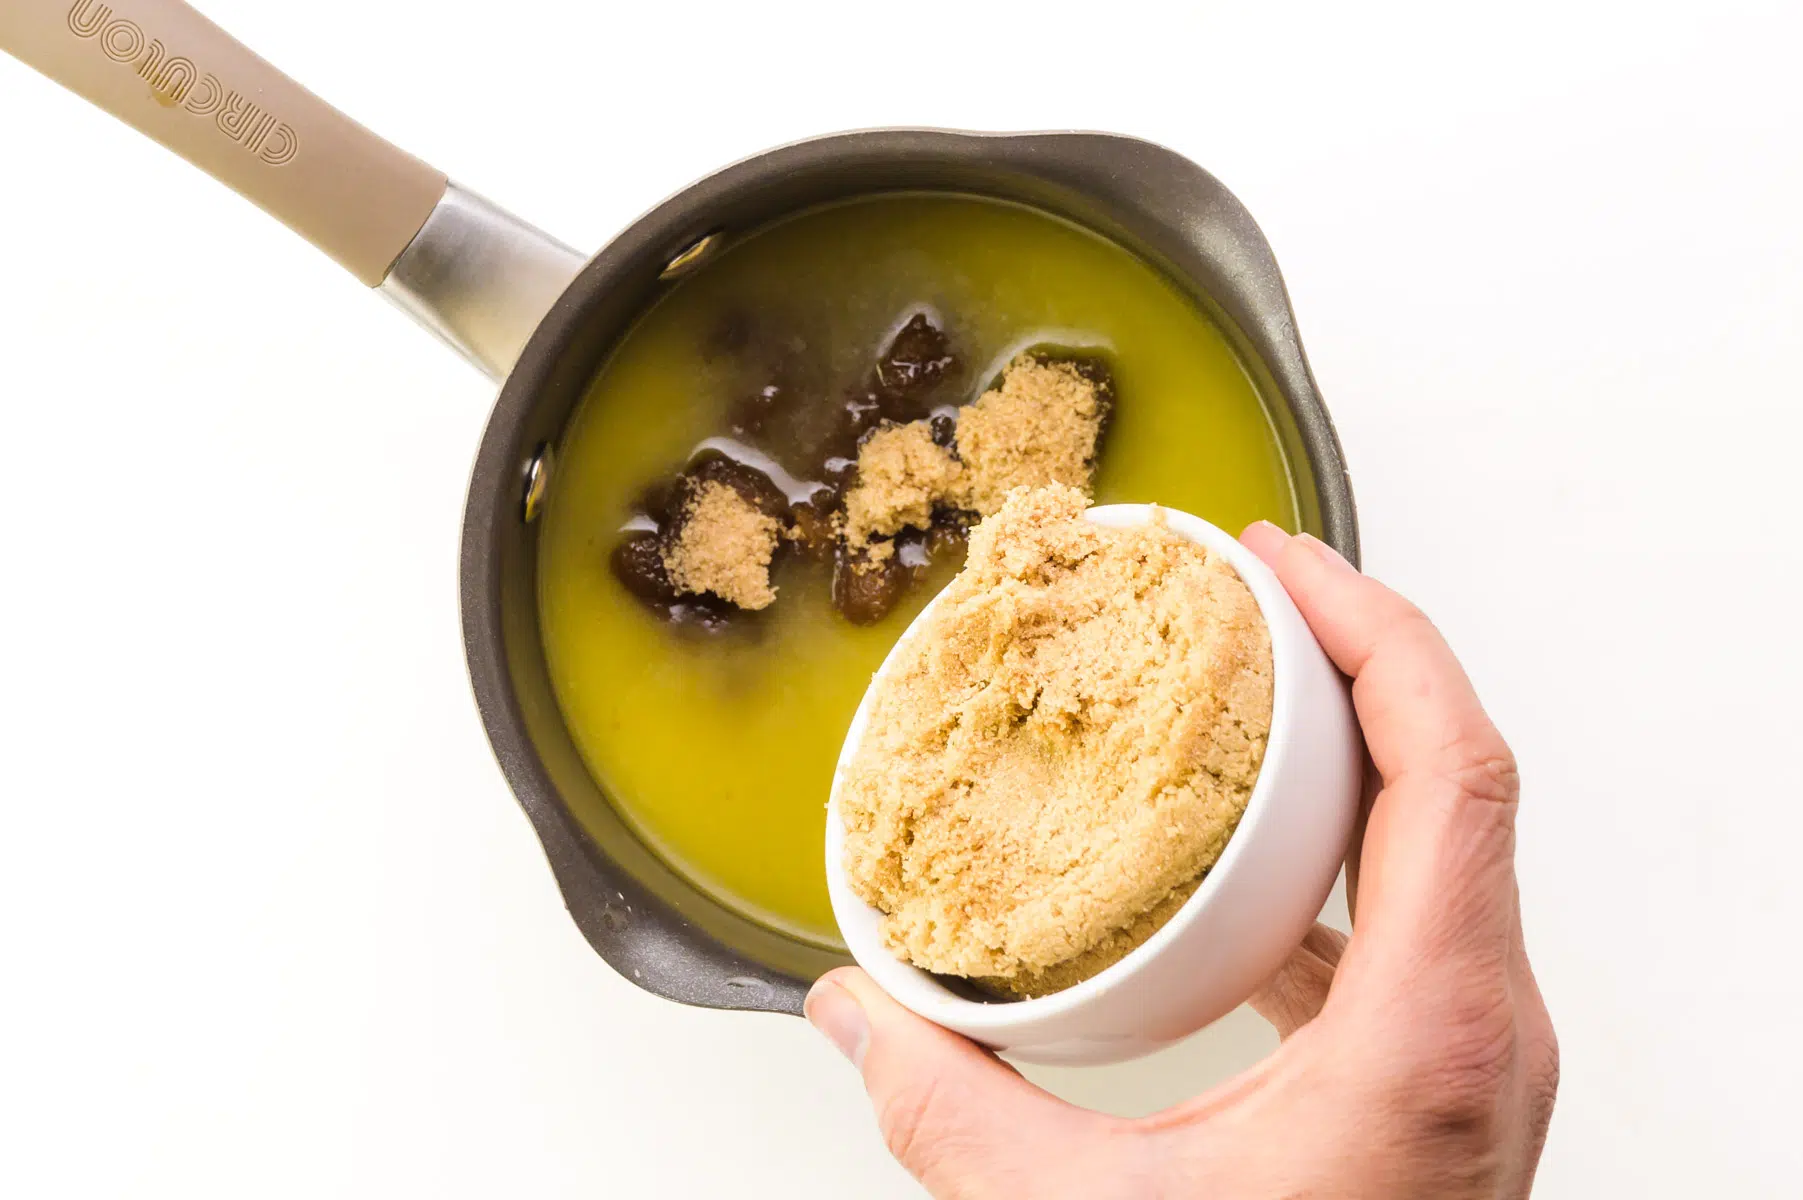 A hand holds a bowl of brown sugar, pouring it into a saucepan with melted butter.